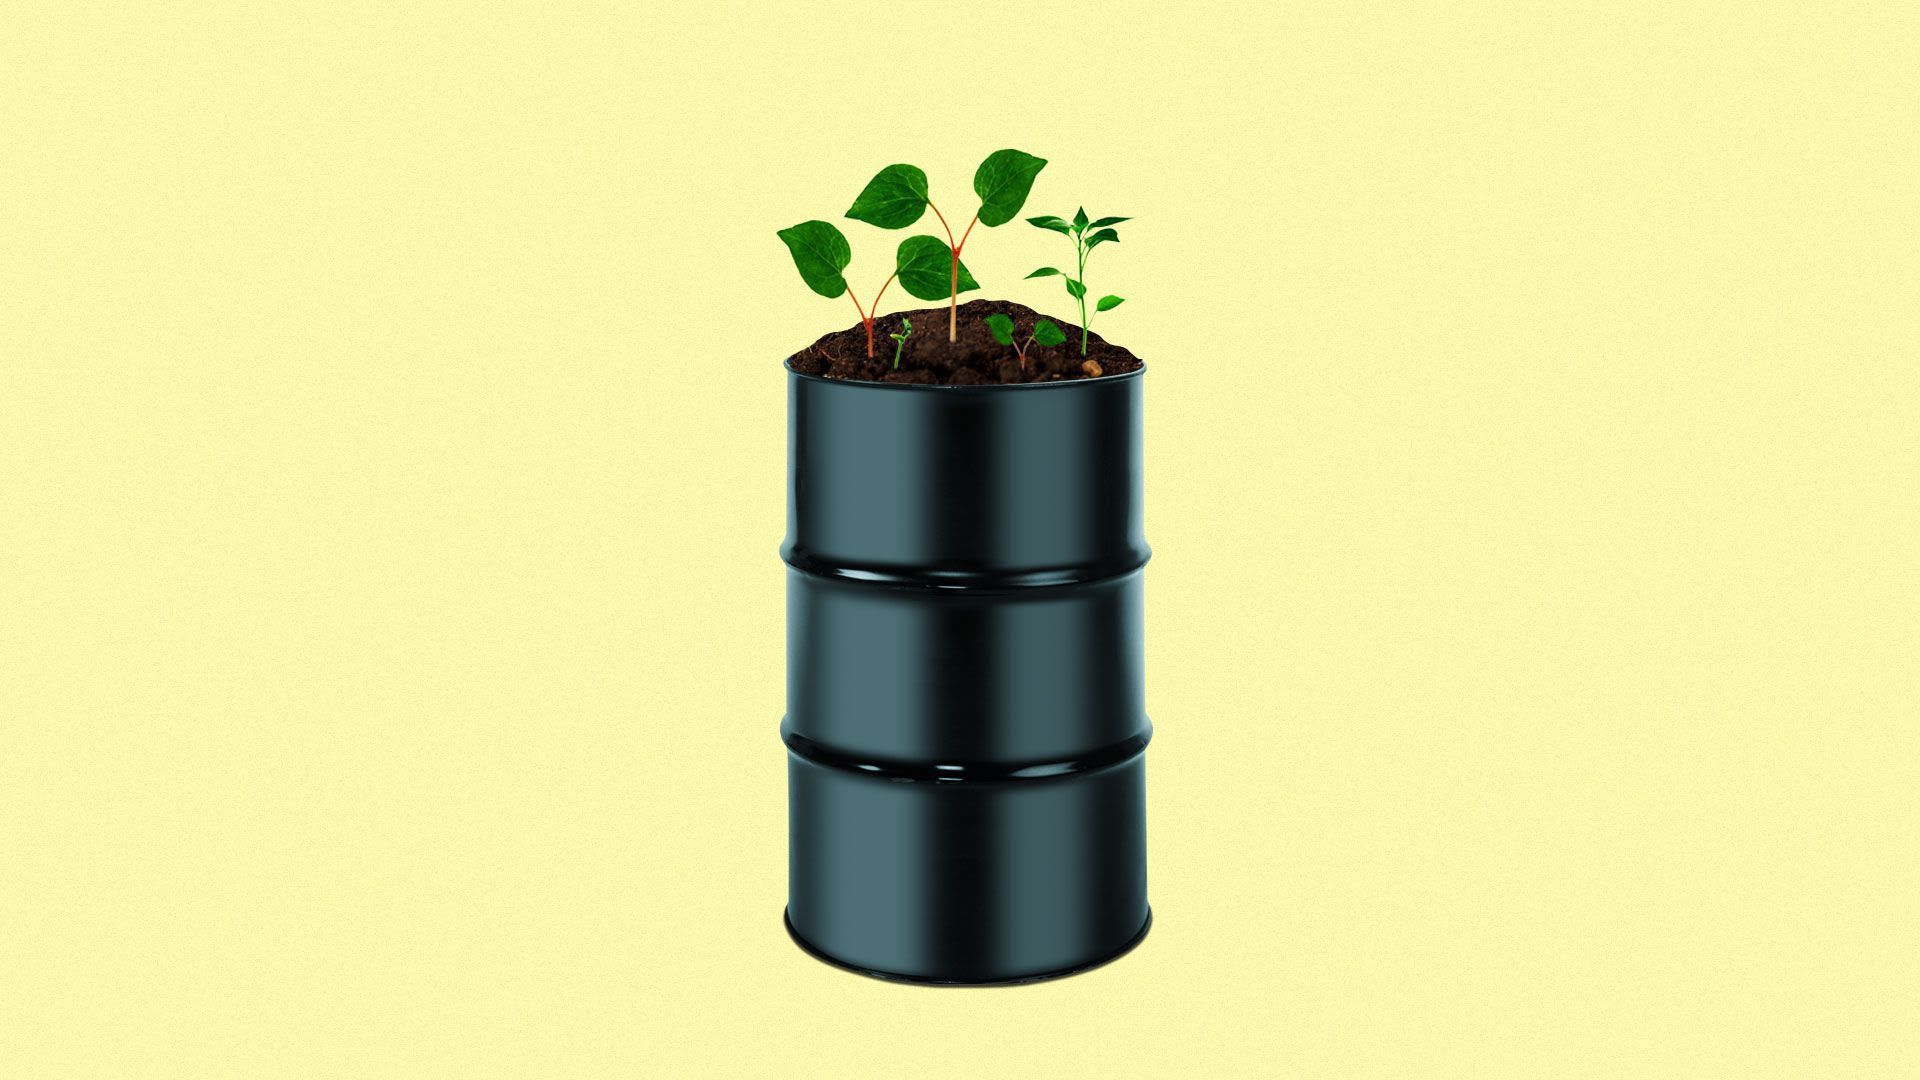 Illustration of an oil barrel with plants growing from it.